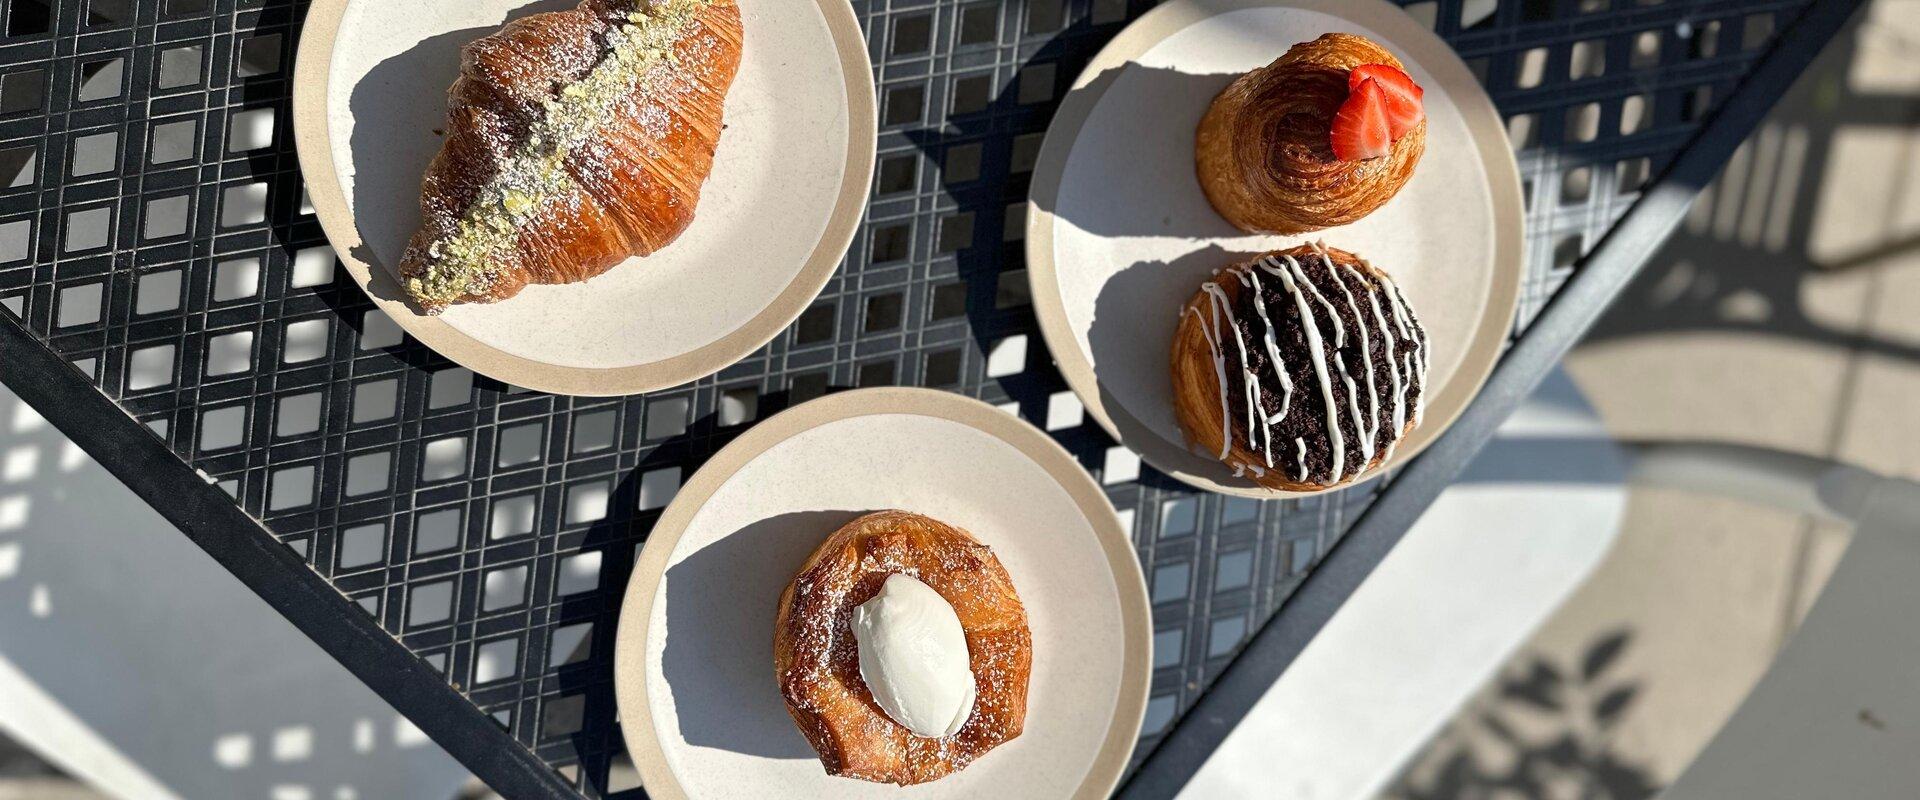 cruffin-croissants-on-terrace